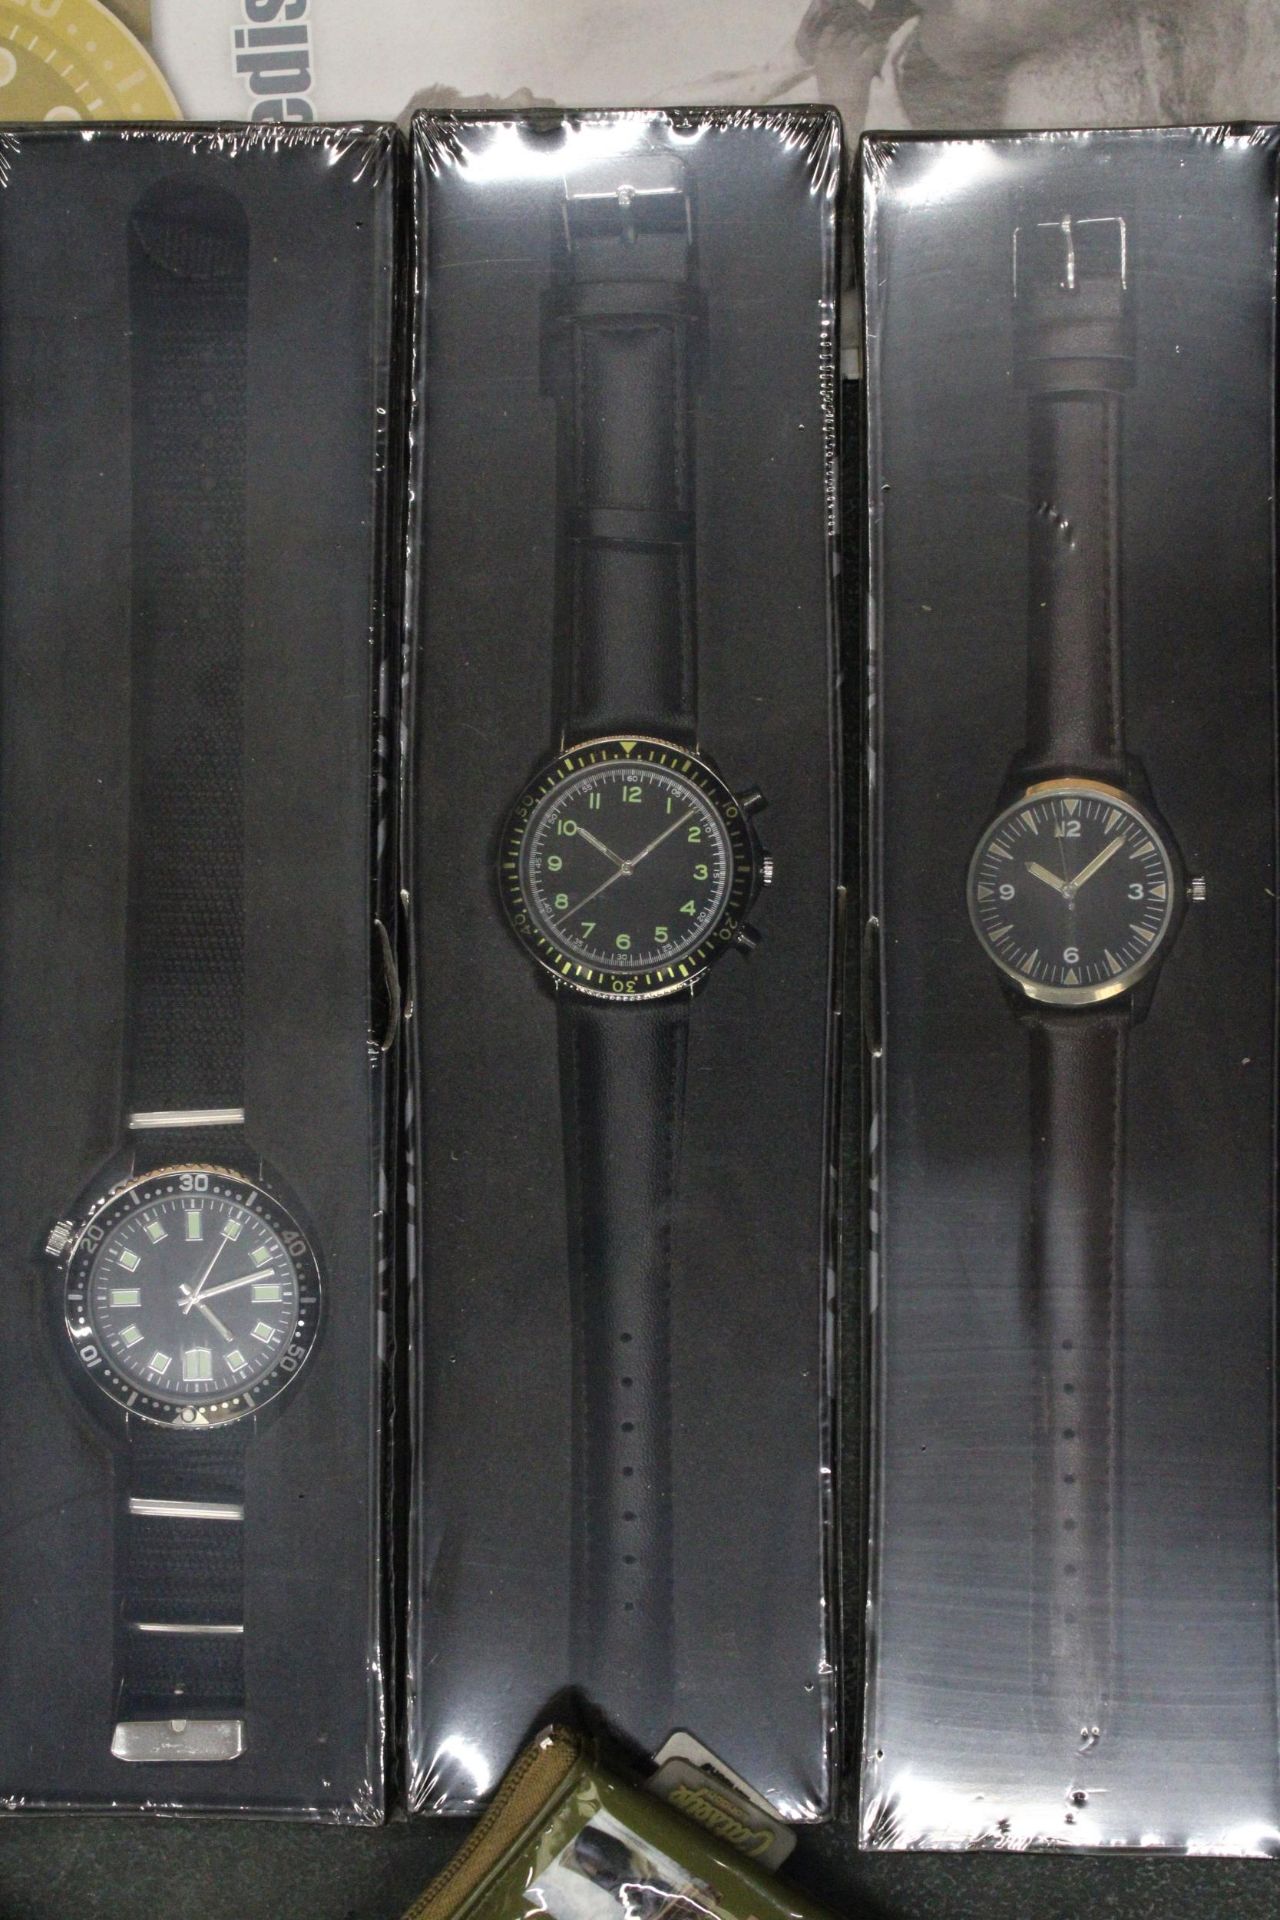 A SELECTION OF MILITARIAN WATCHES TOGETHER WITH A COLLECTION OF MILITARY WATCH MAGAZINES - Image 5 of 6